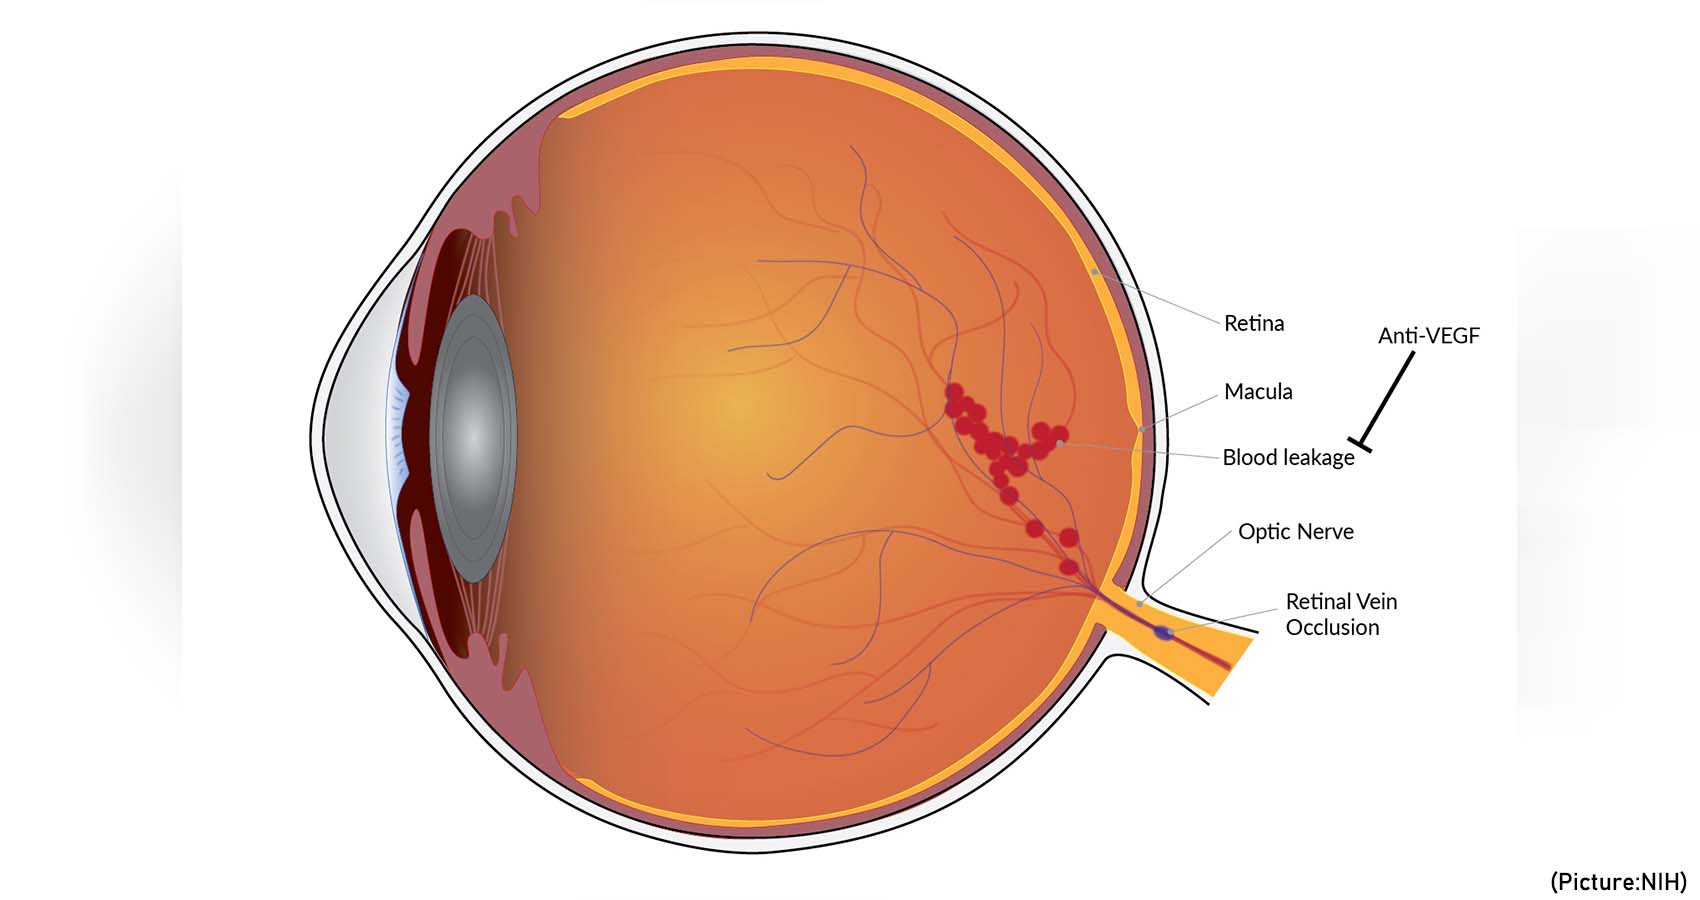 Vision Improvement Is Long-Lasting With Treatment For Blinding Blood Vessel Condition